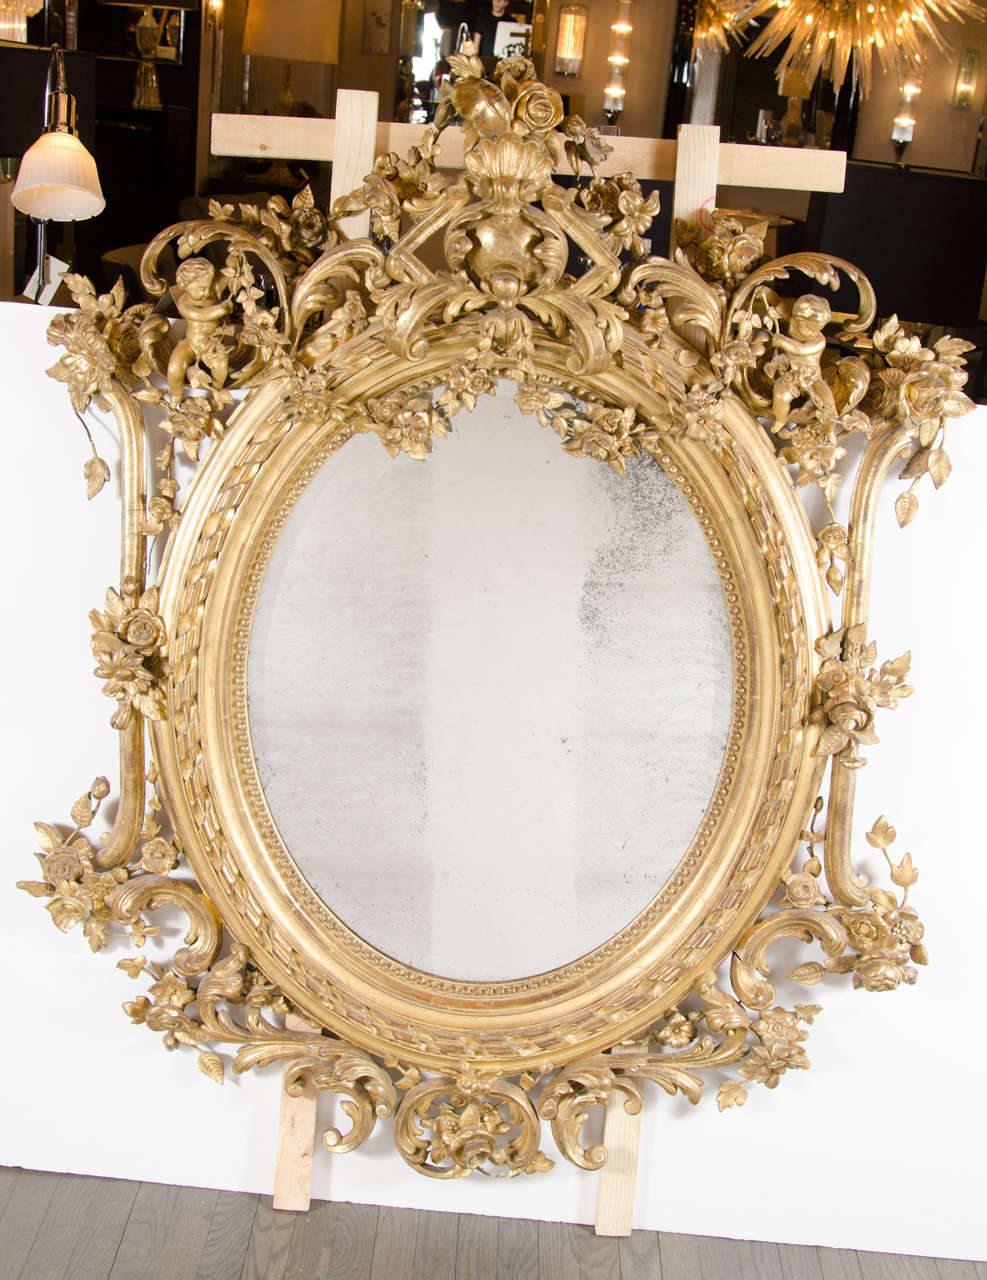 Magnificent 19th Century French Rococo oval mirror with 24K gold gilt details and stylized foliage detailing.  This stunning 19th Century French Rococo mirror is a true work of art with its hand-carved detailed surround that features a top crown of